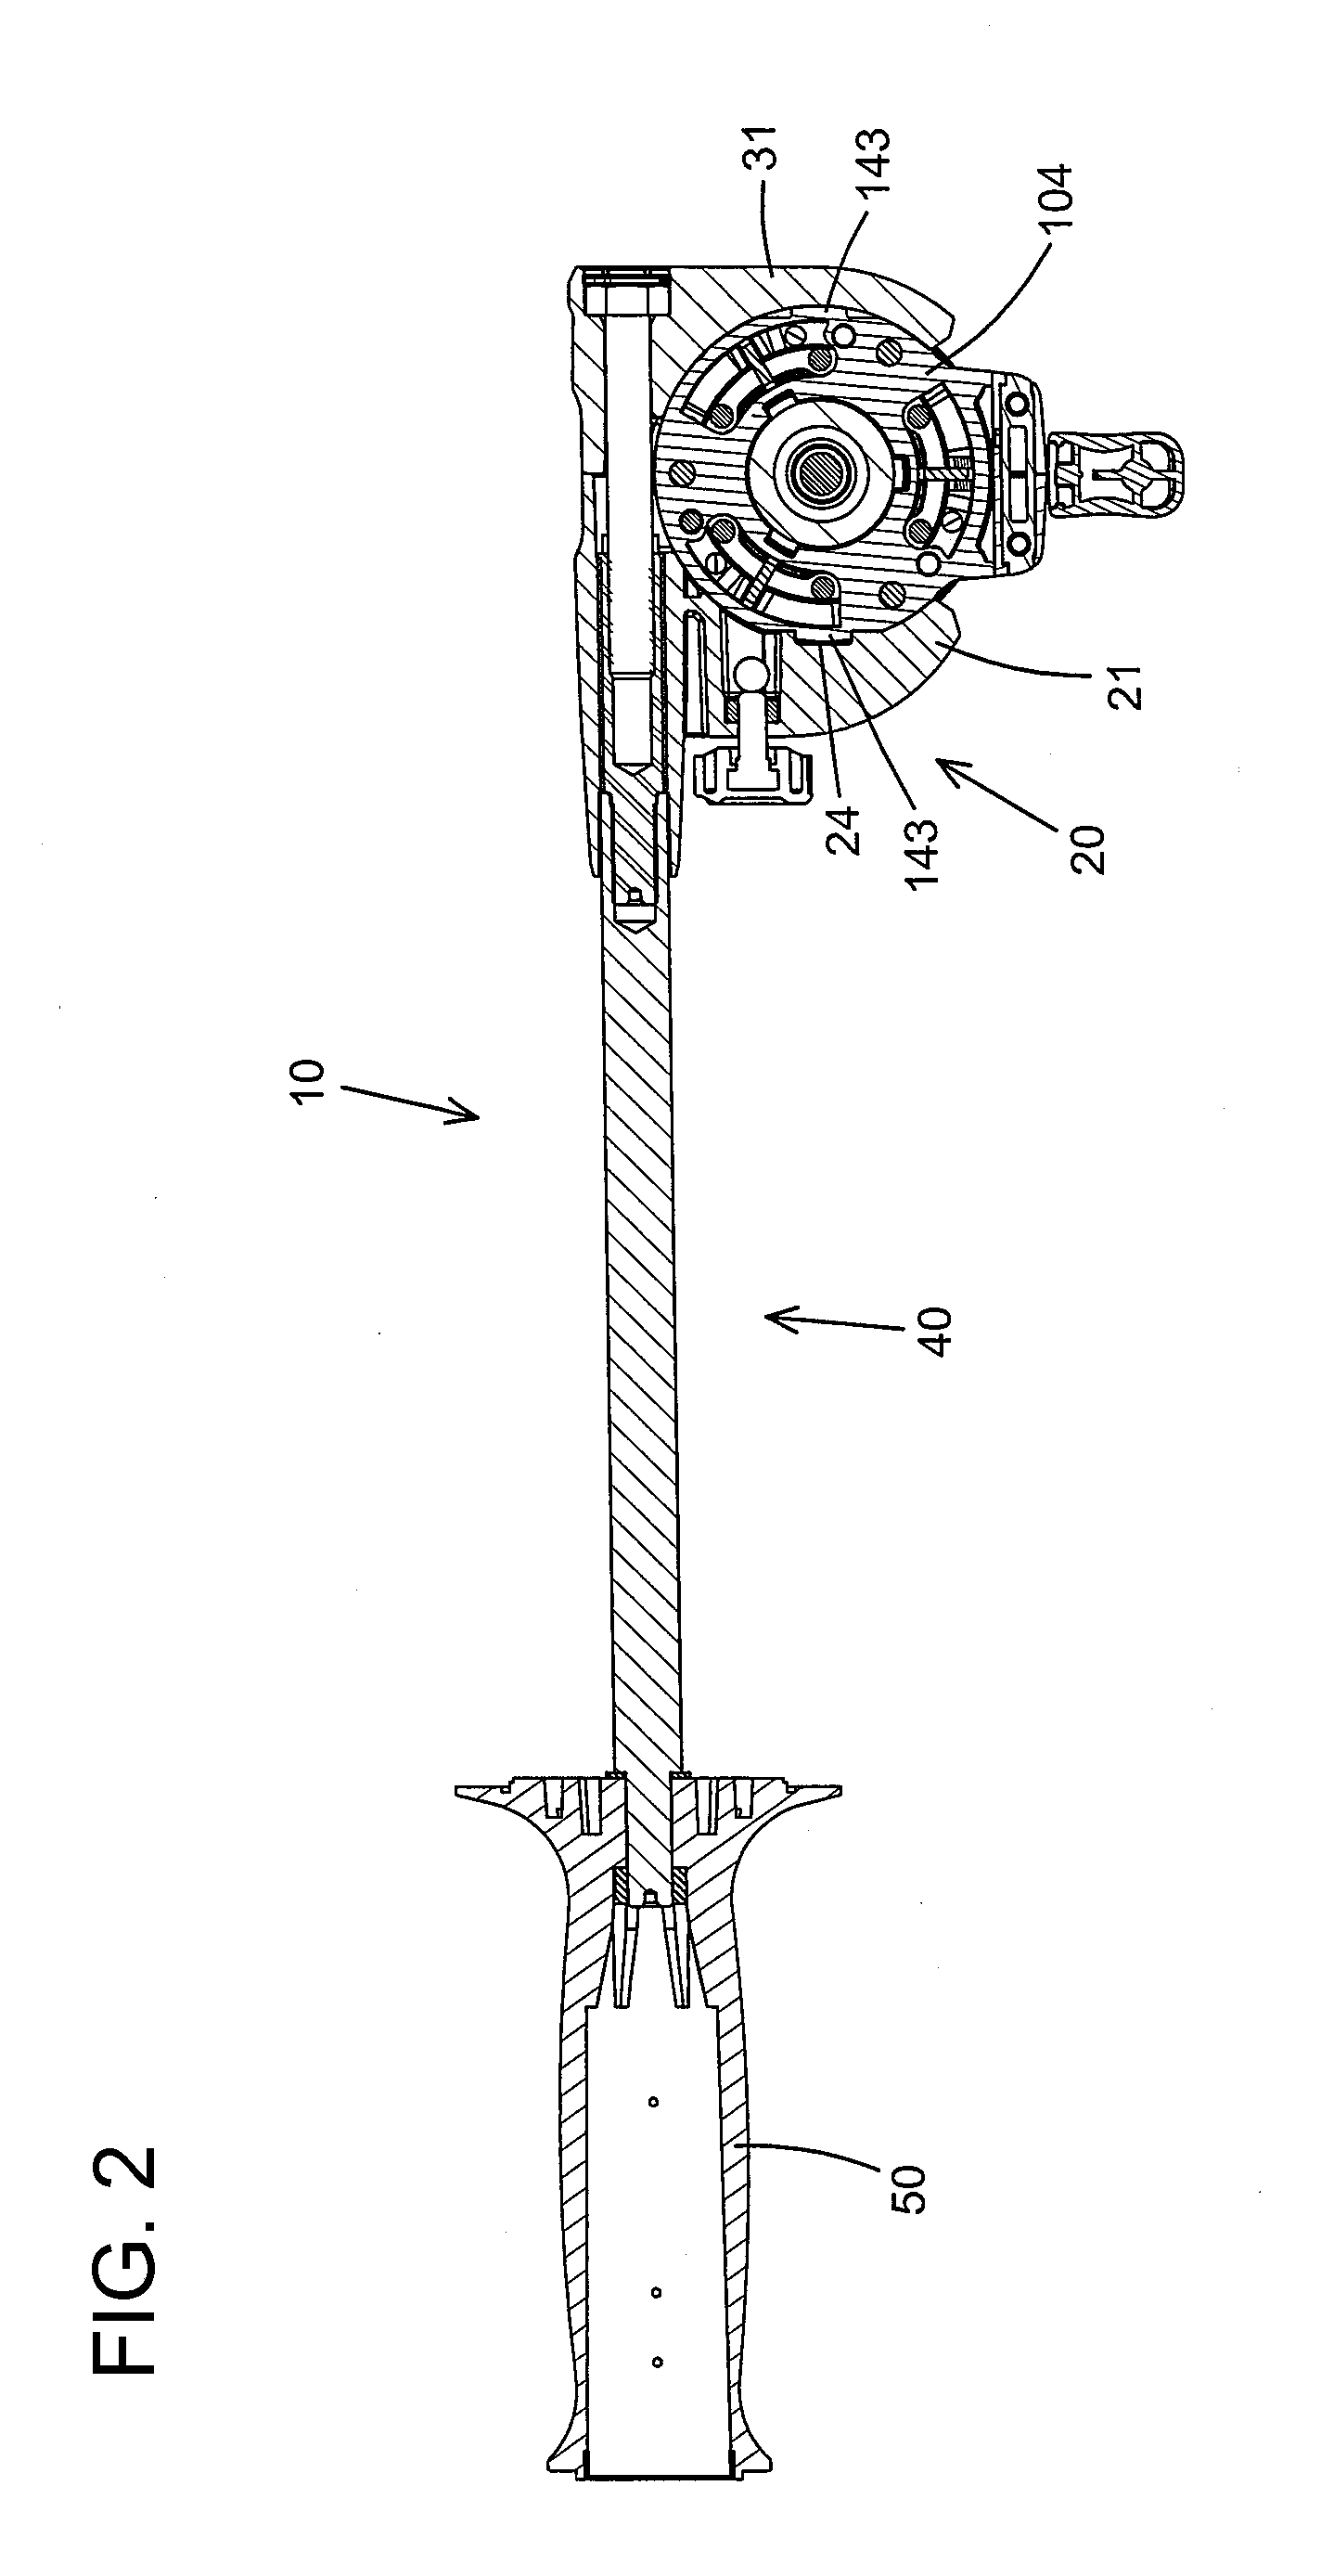 Auxiliary handle and power tool having the same